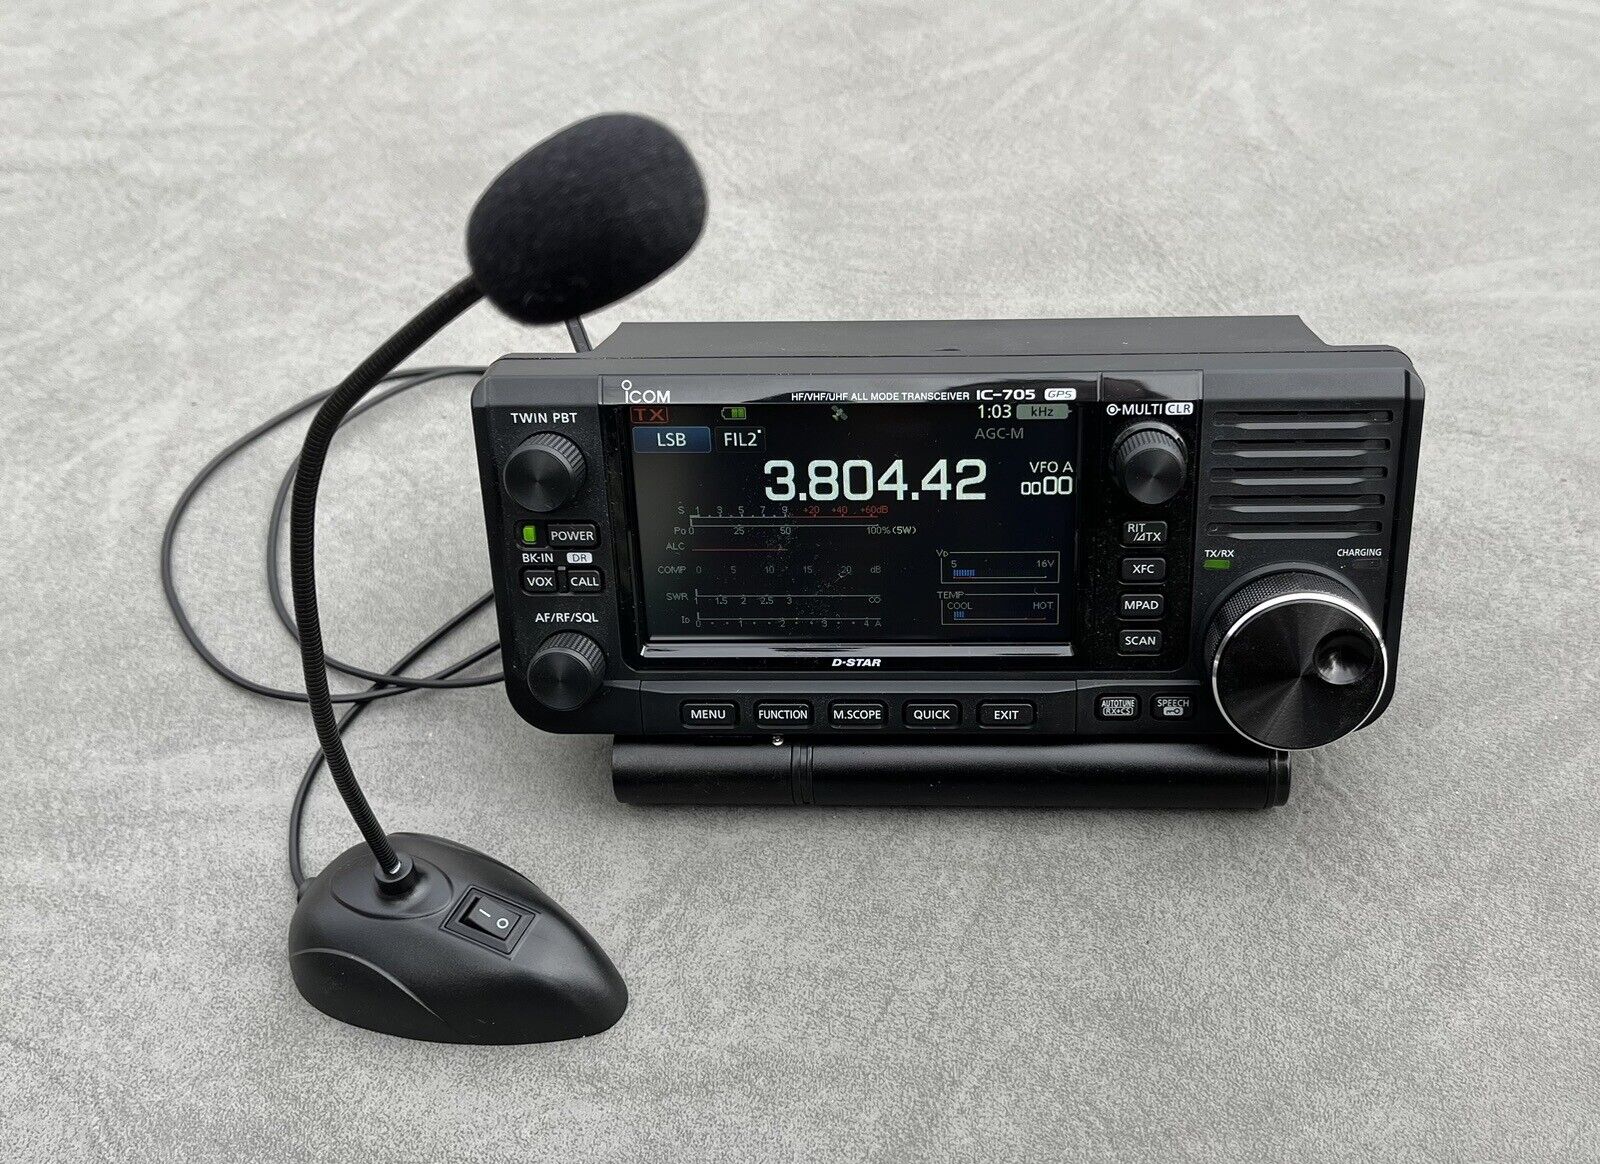 W2ENY Ultra-Mini Travel/Desk Mic for Icom IC-705. Available Now for $40.00